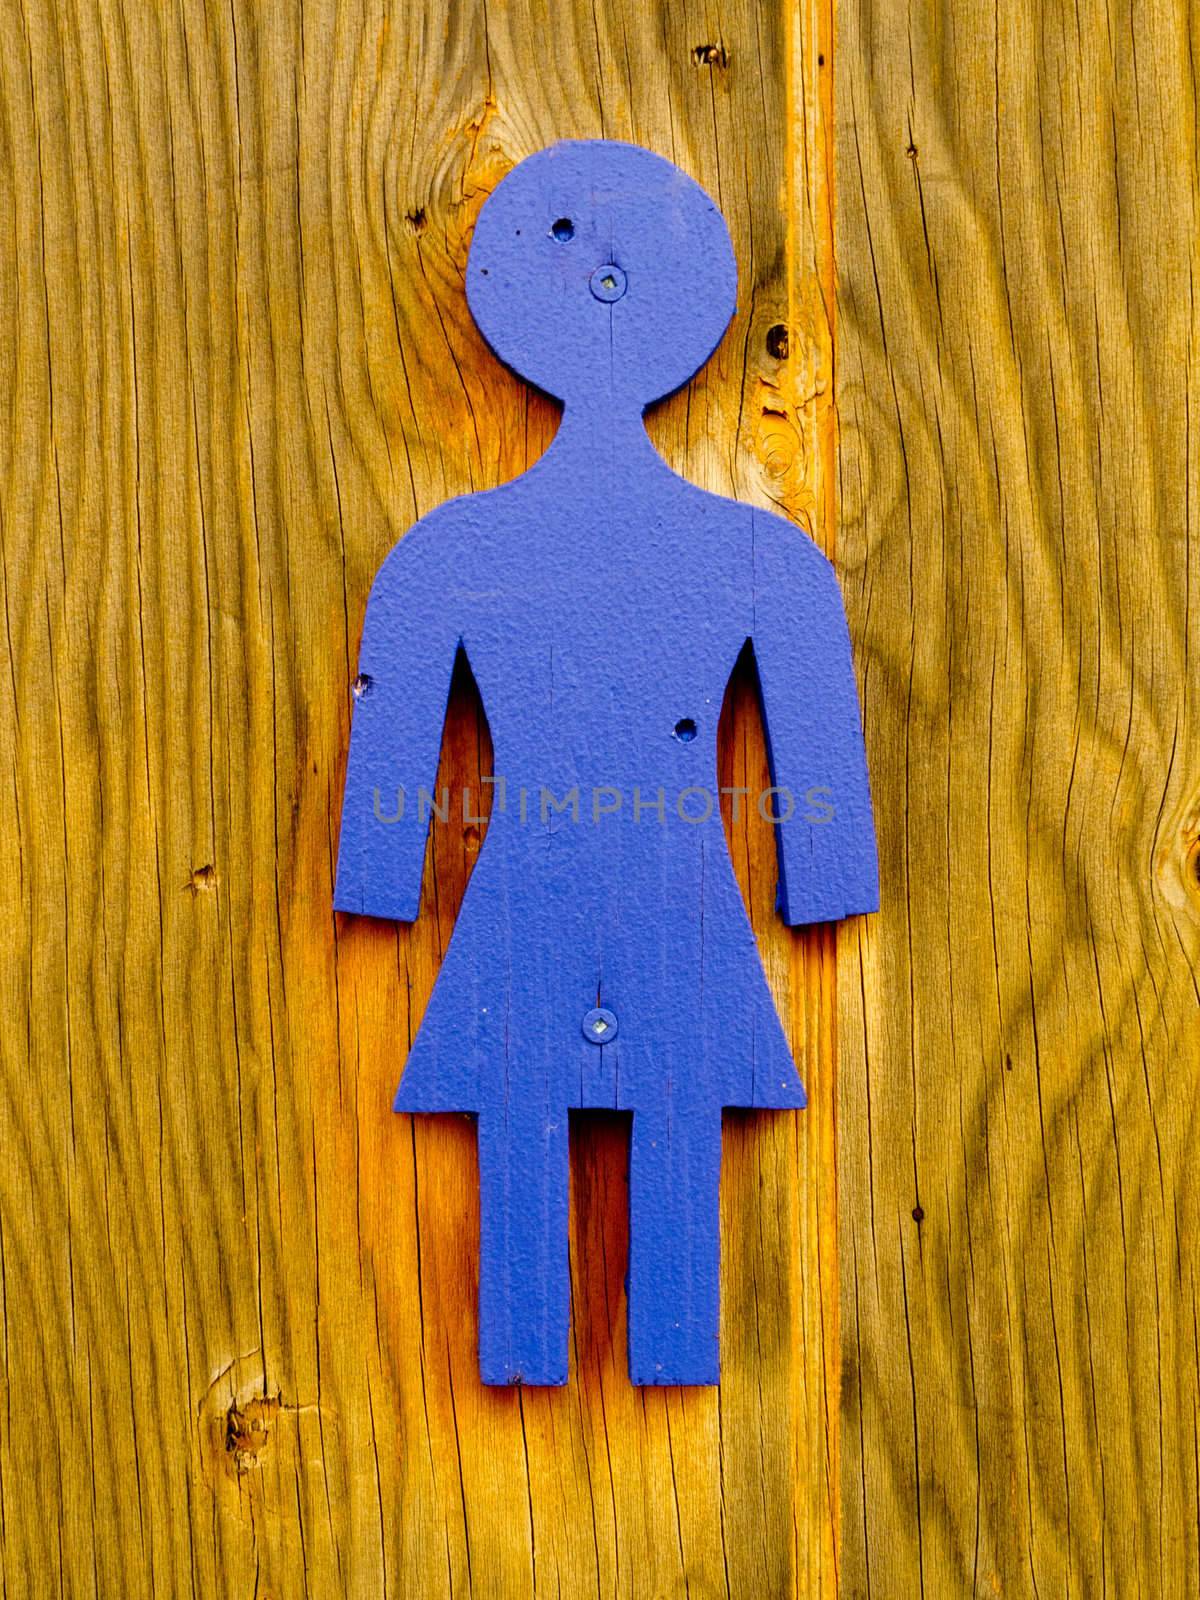 Womens restroom icon, toilet sign on wooden wall by PiLens